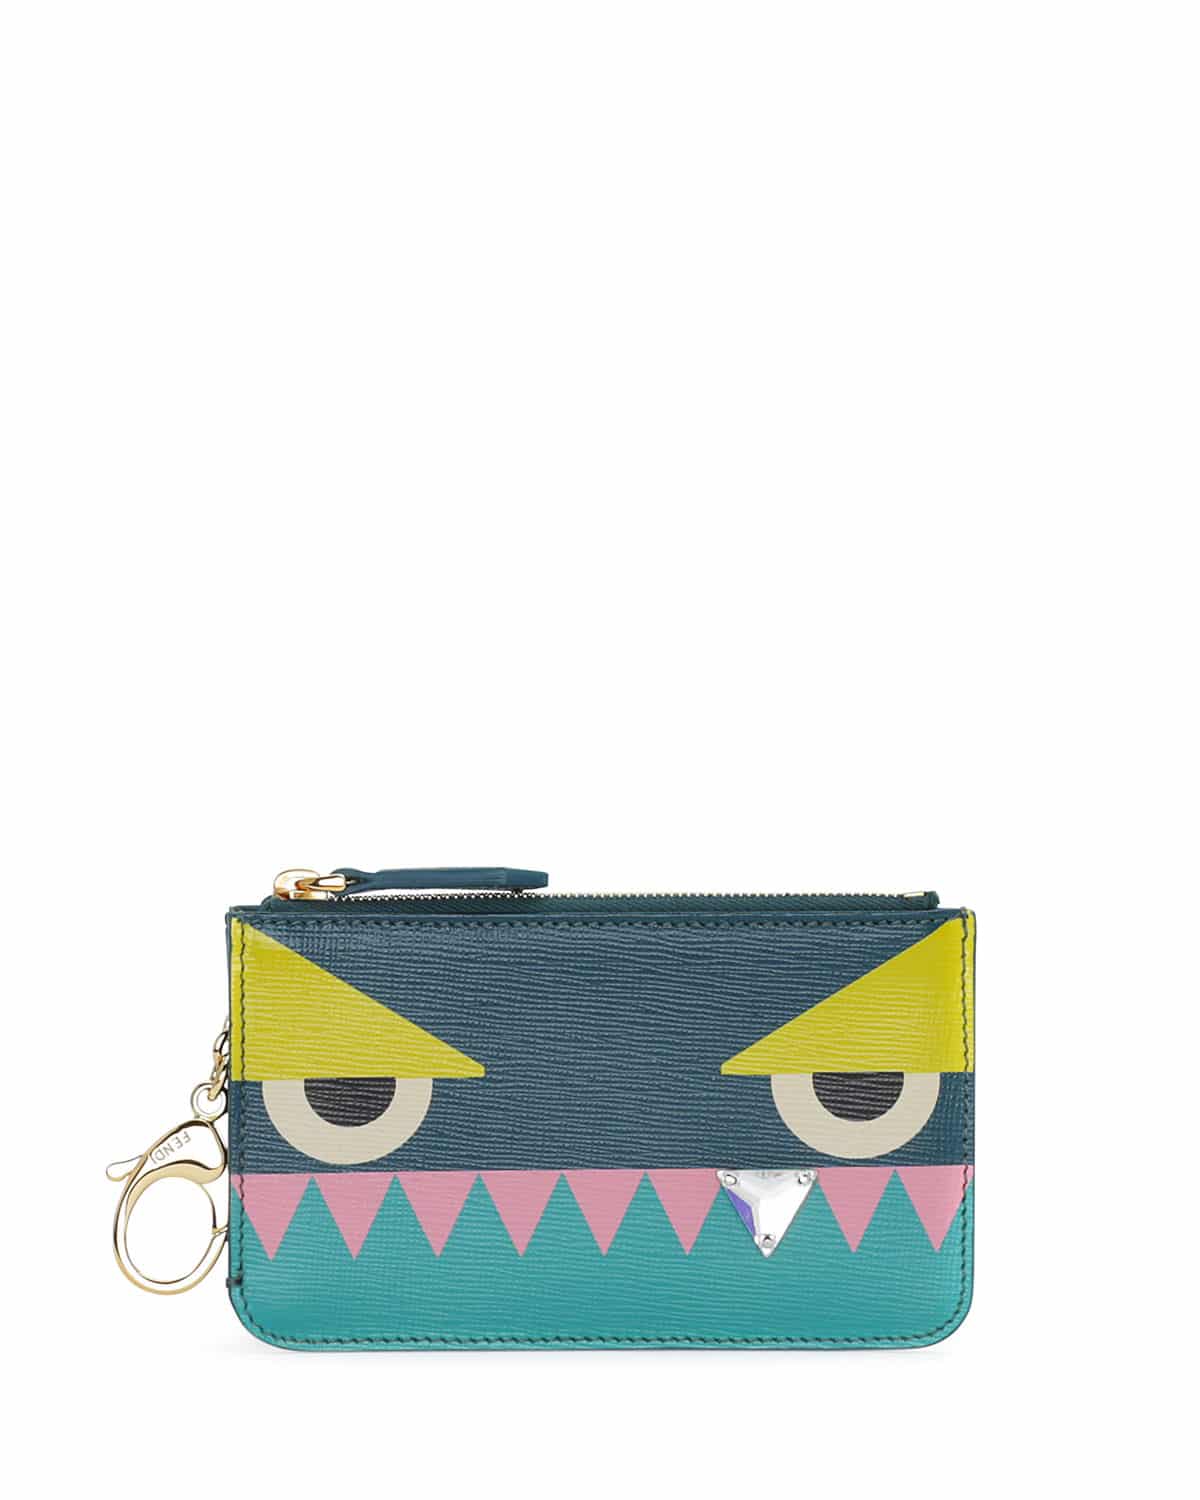 Fendi Pre-Fall 2014 Bag Collection featuring New Fur Monsters 